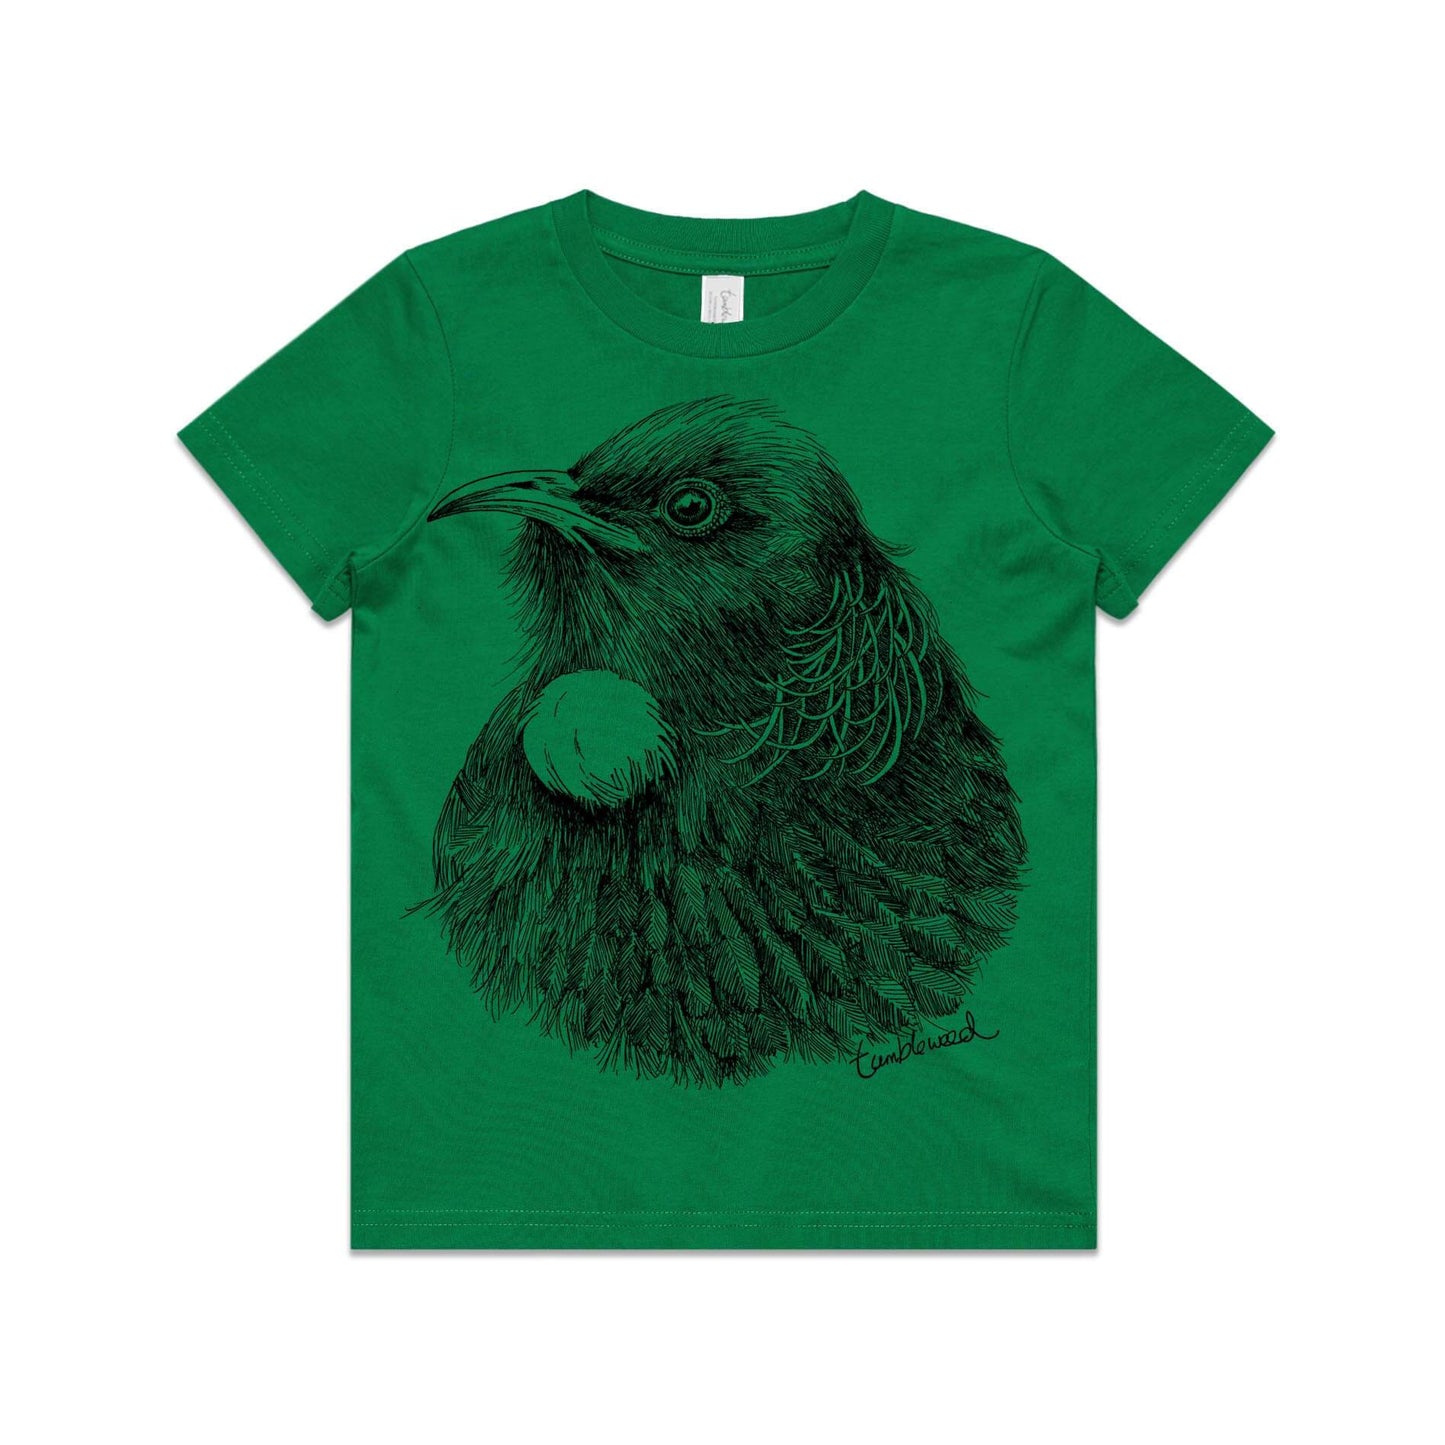 Green, cotton kids' t-shirt with screen printed tui design.